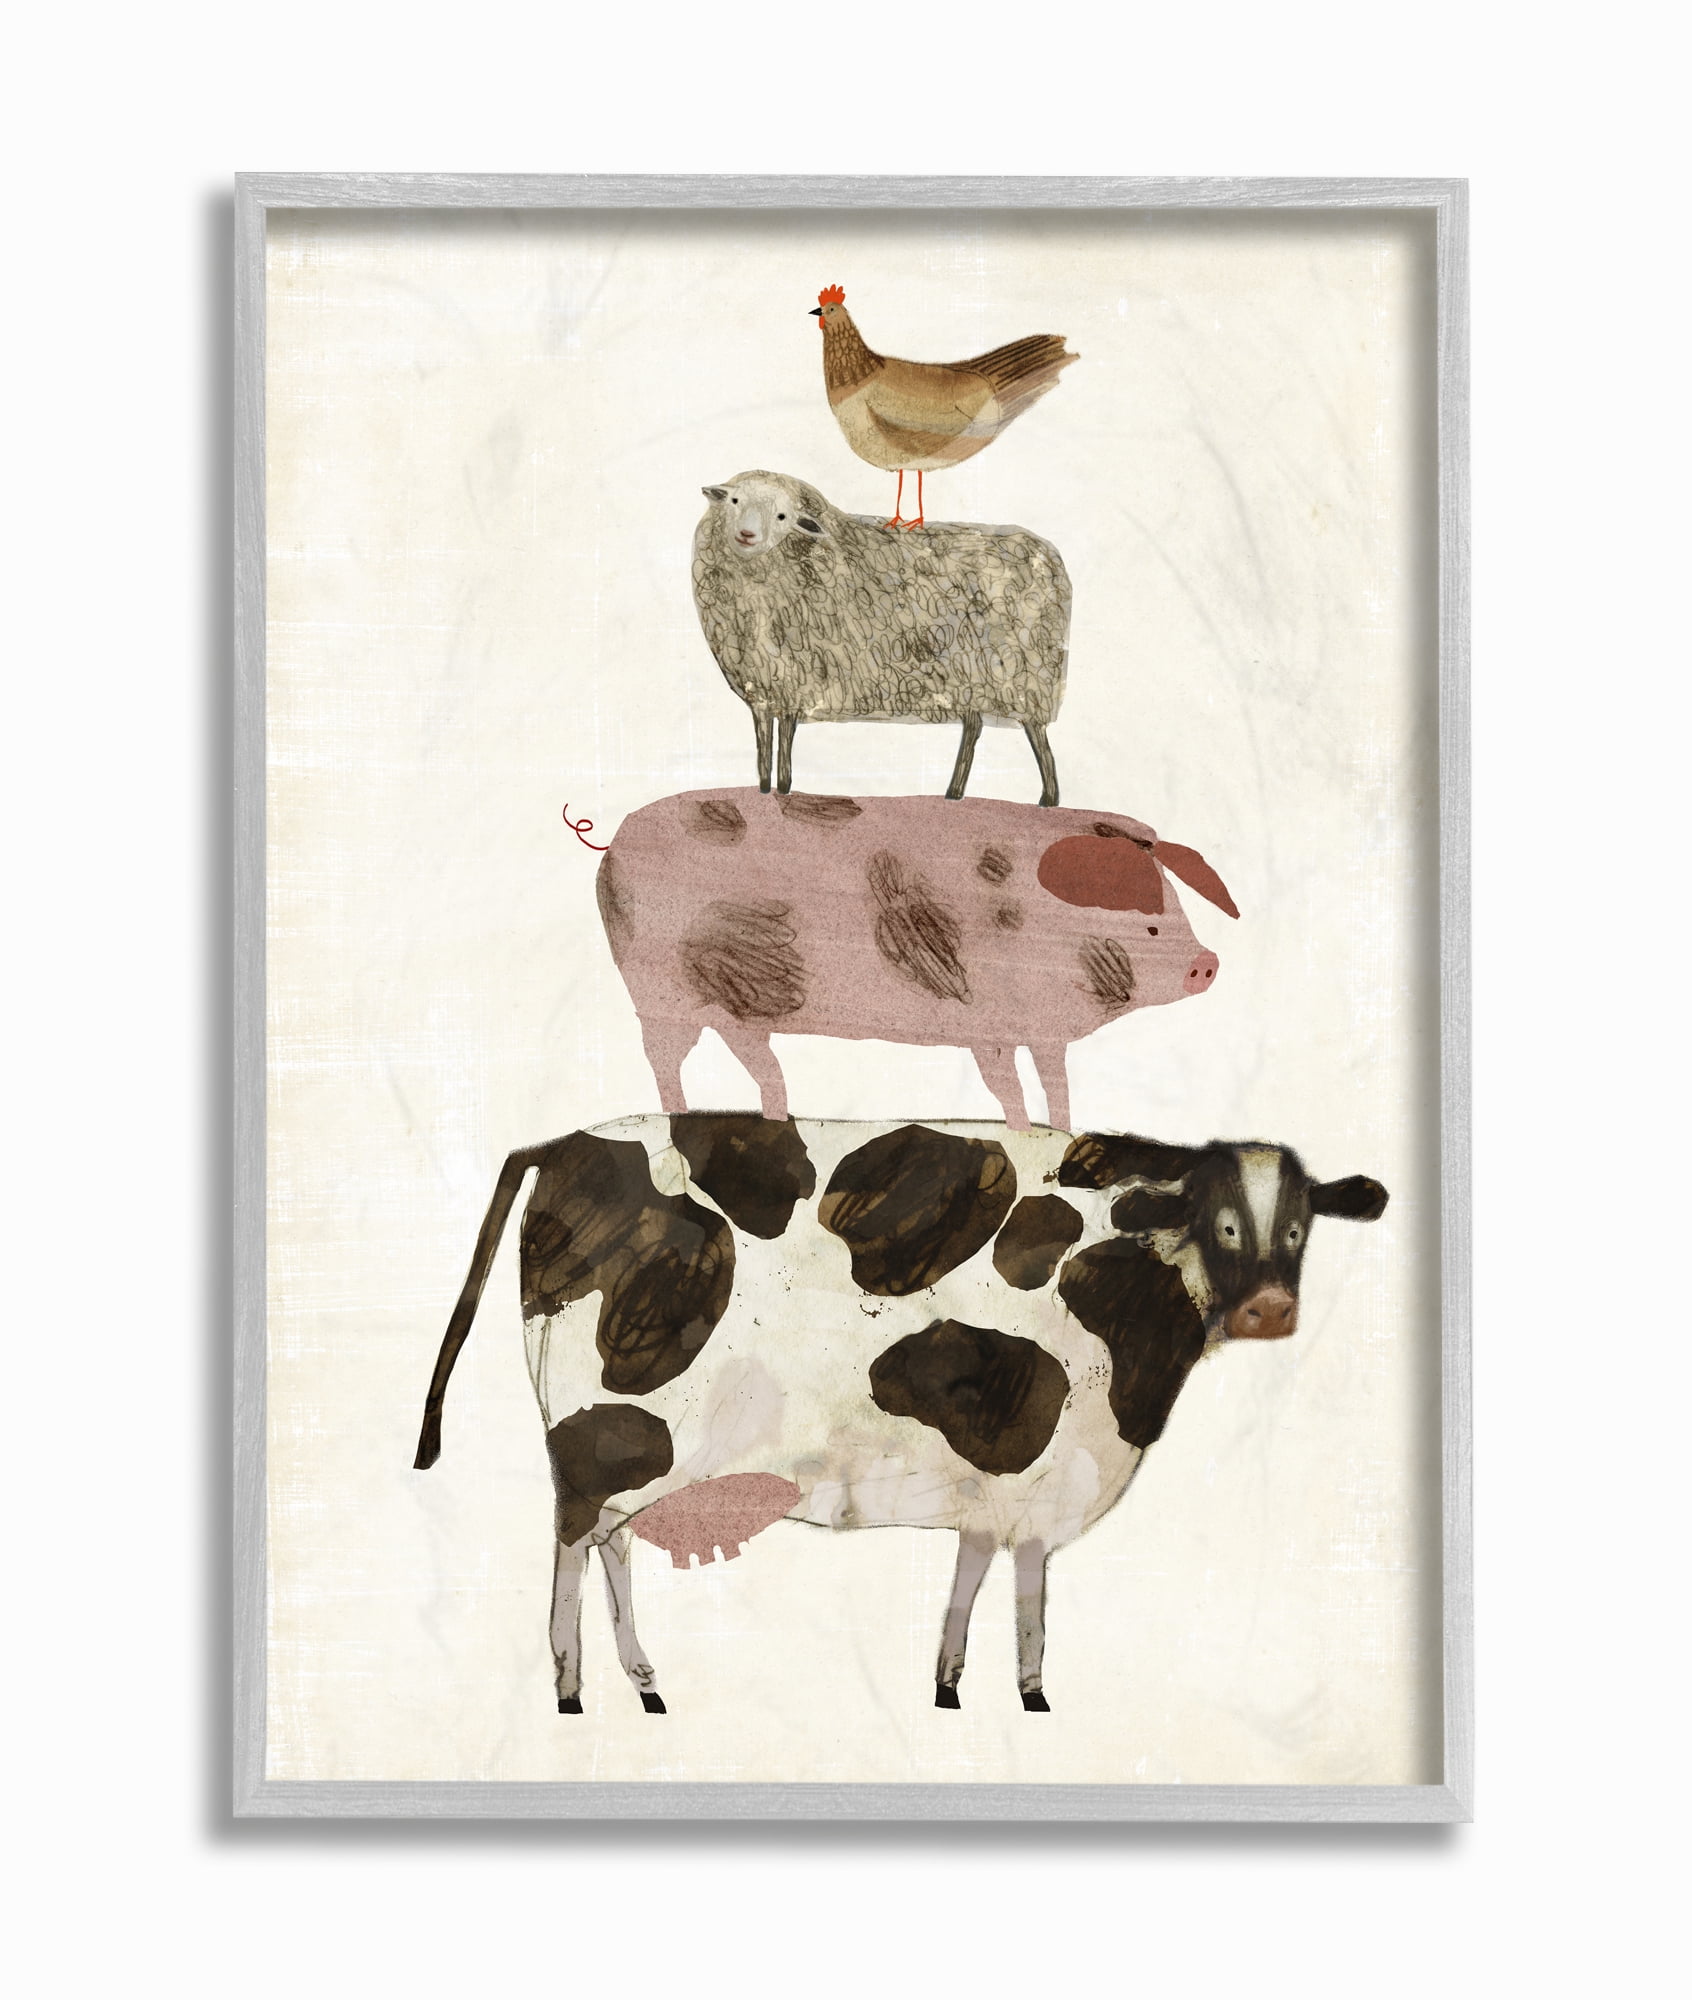 Framed Animals Buds Stupell by Pig Cow Sheep Industries Farm Wall Stacked Barnyard Art and Chicken Borges Victoria